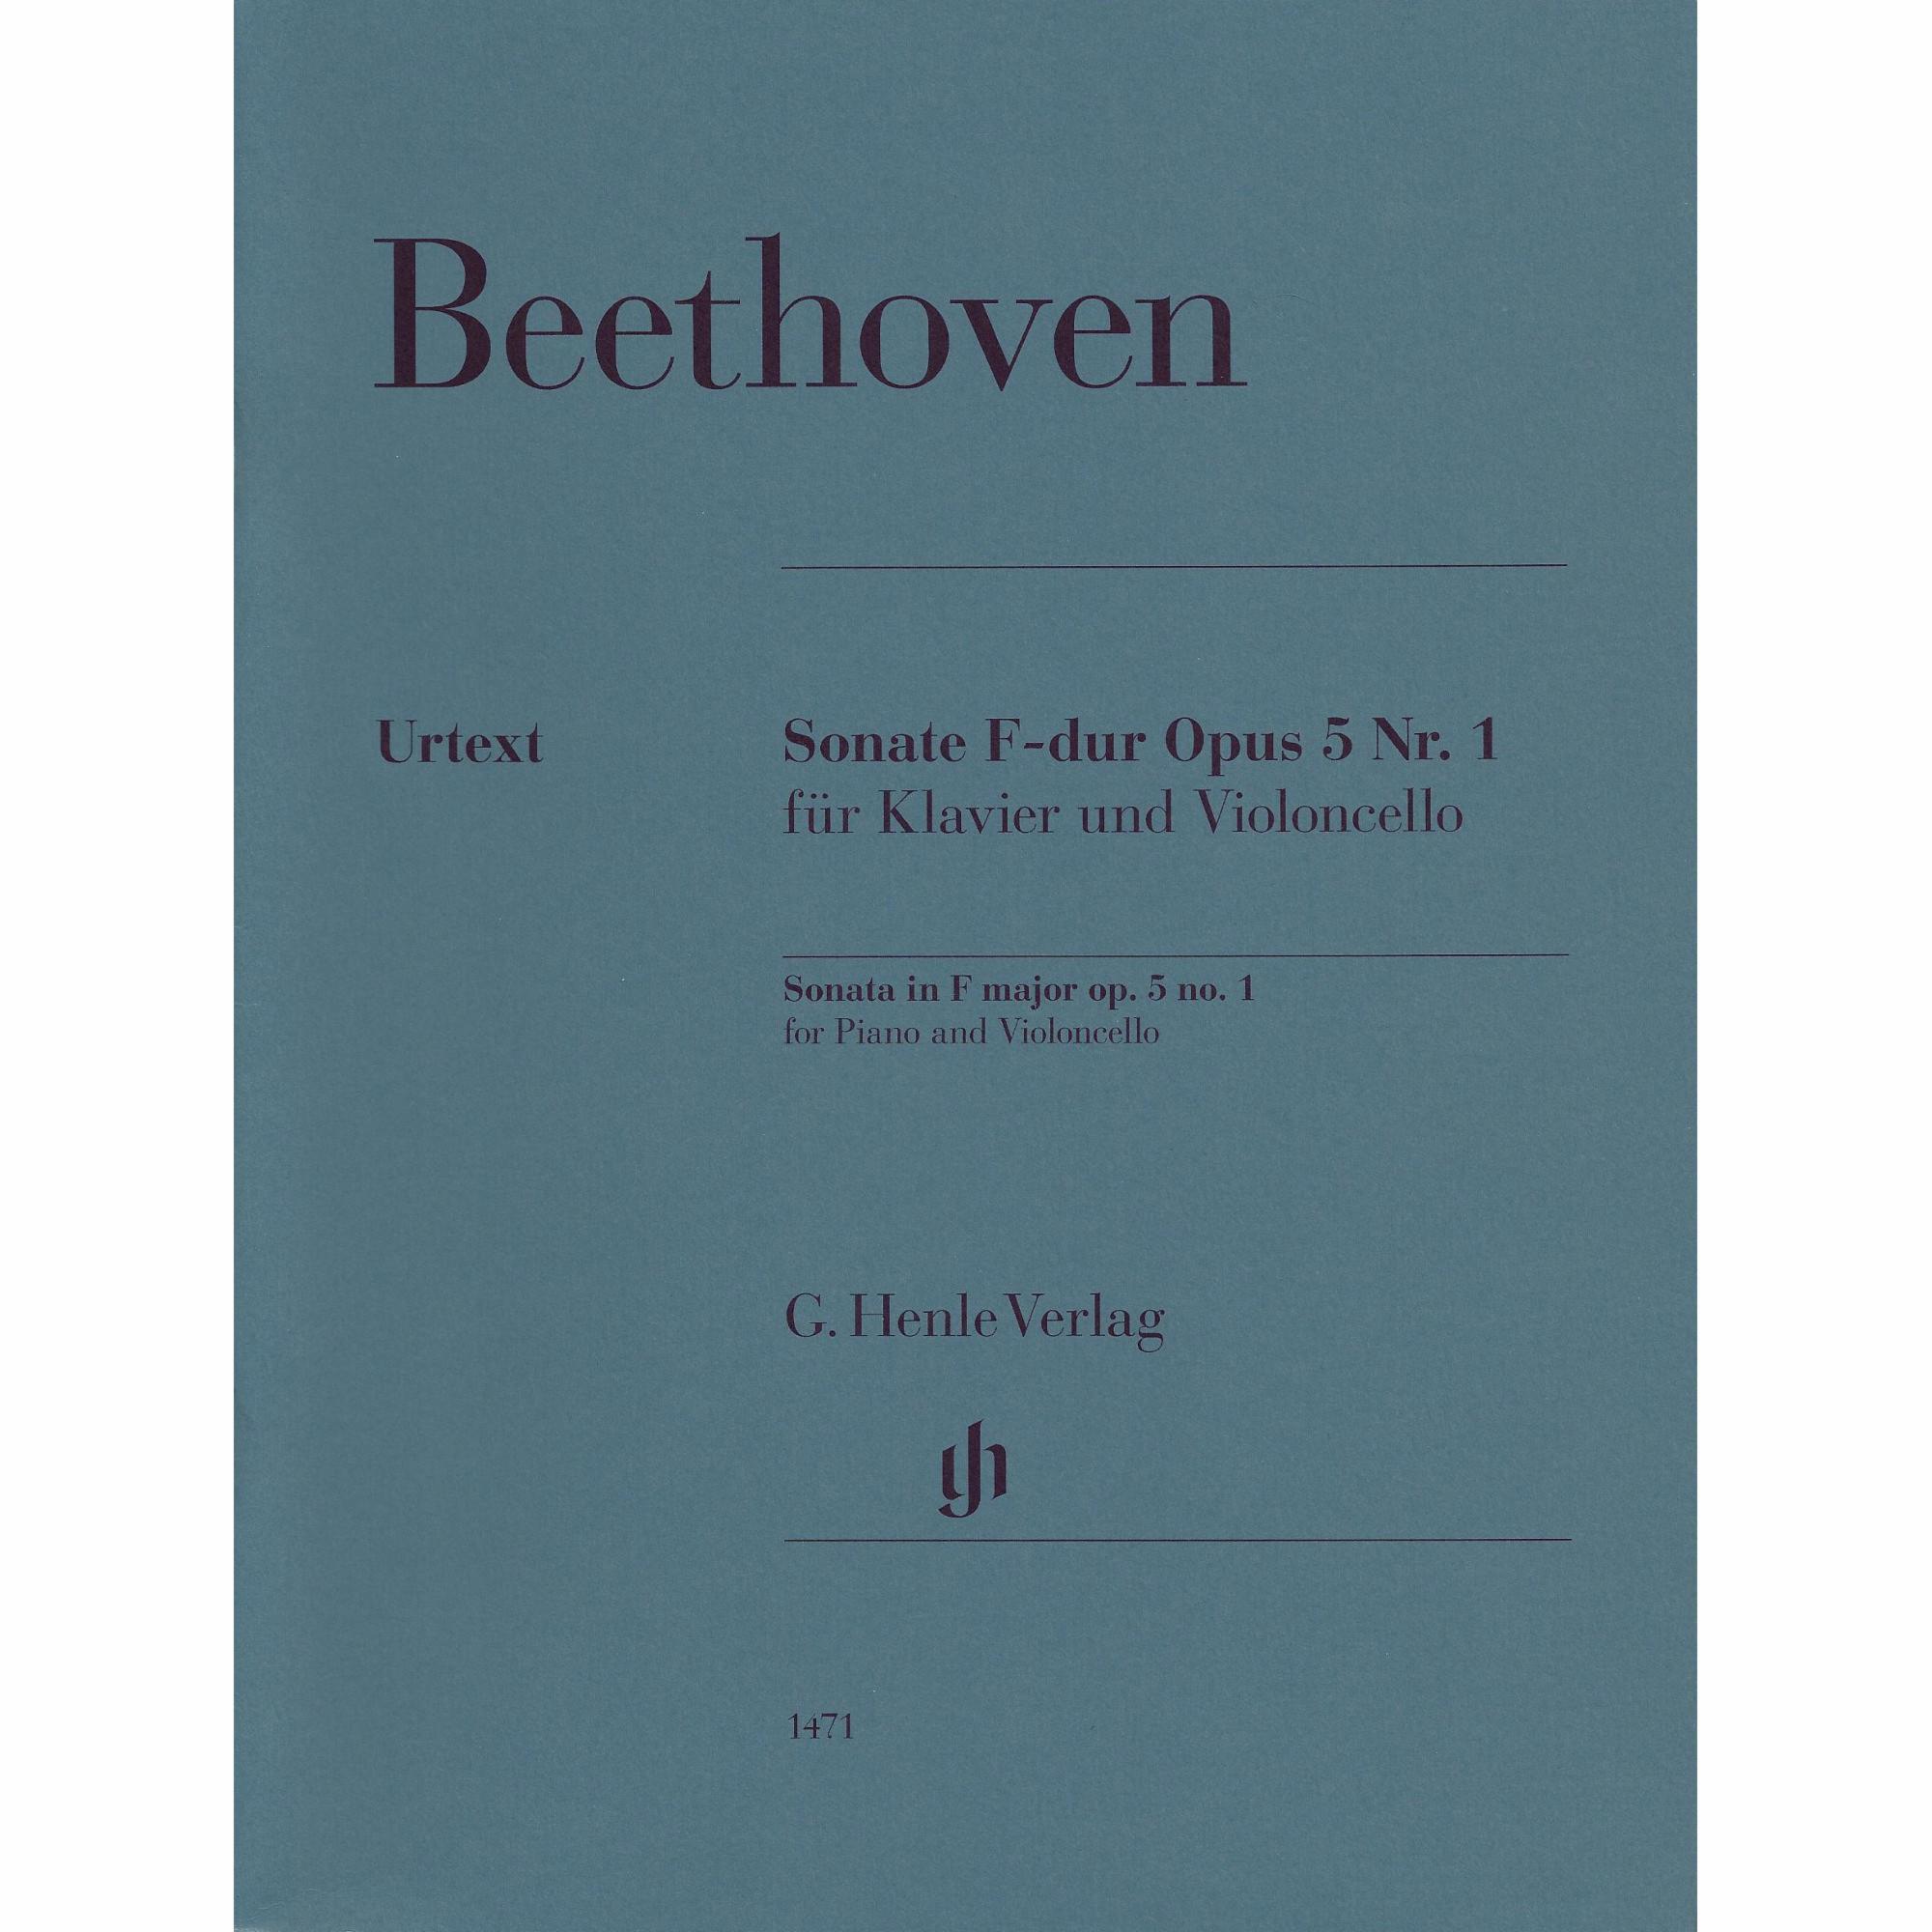 Beethoven -- Sonata in F Major, Op. 5, No. 1 for Cello and Piano